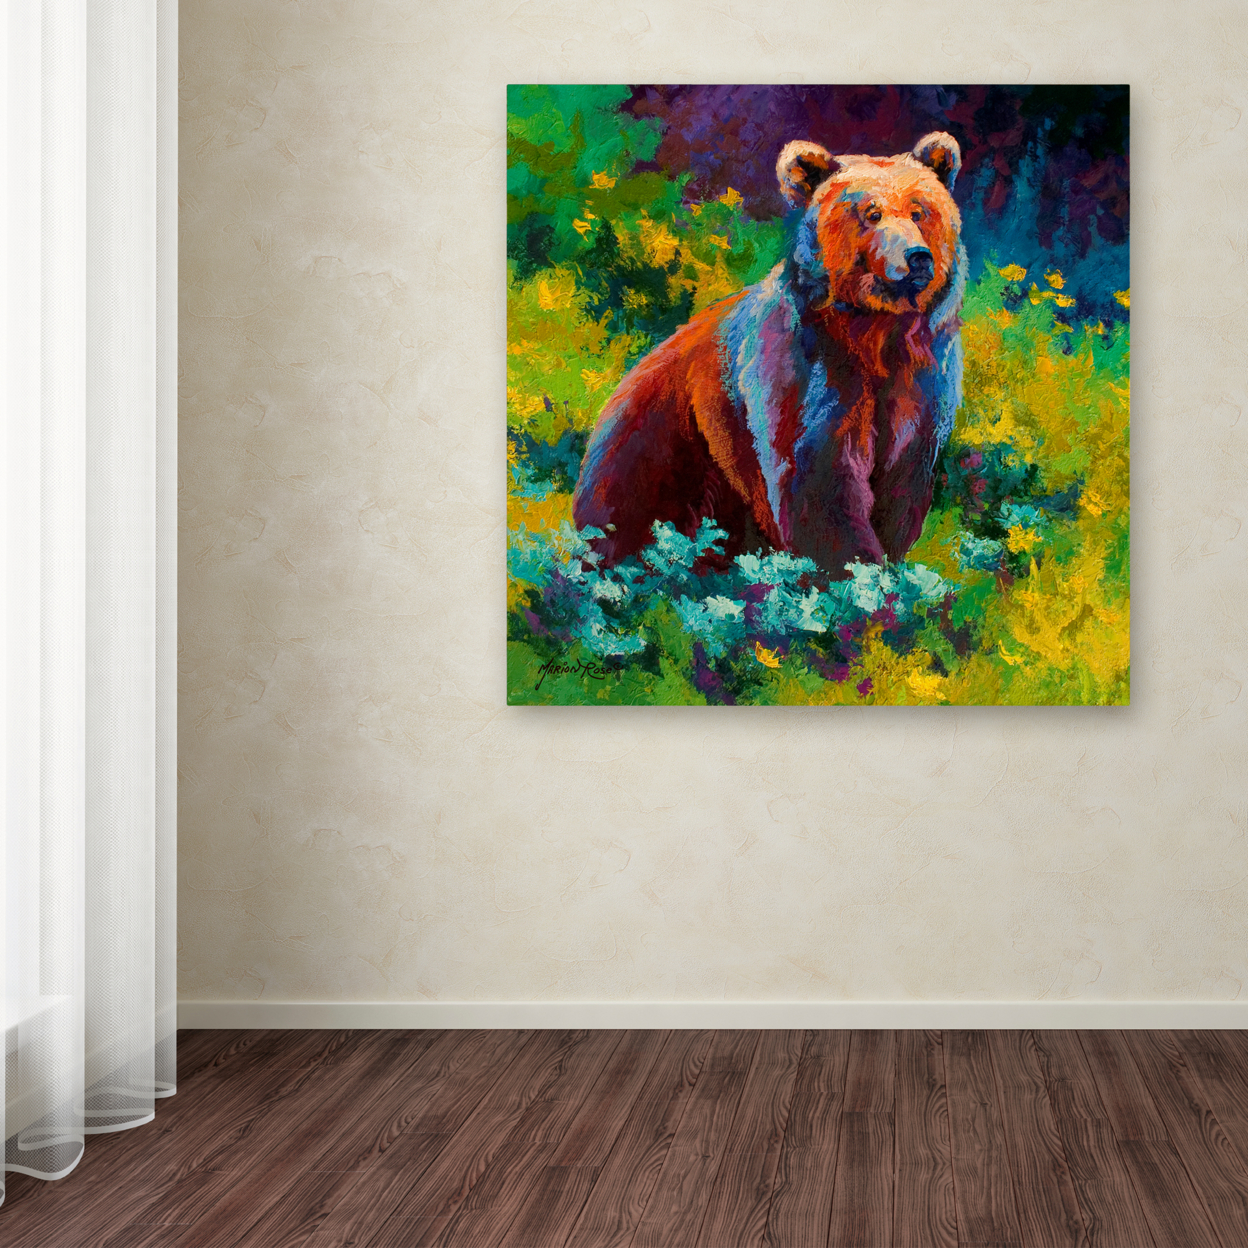 Marion Rose 'Wildflower Grizz' Ready To Hang Canvas Art 35 X 35 Inches Made In USA